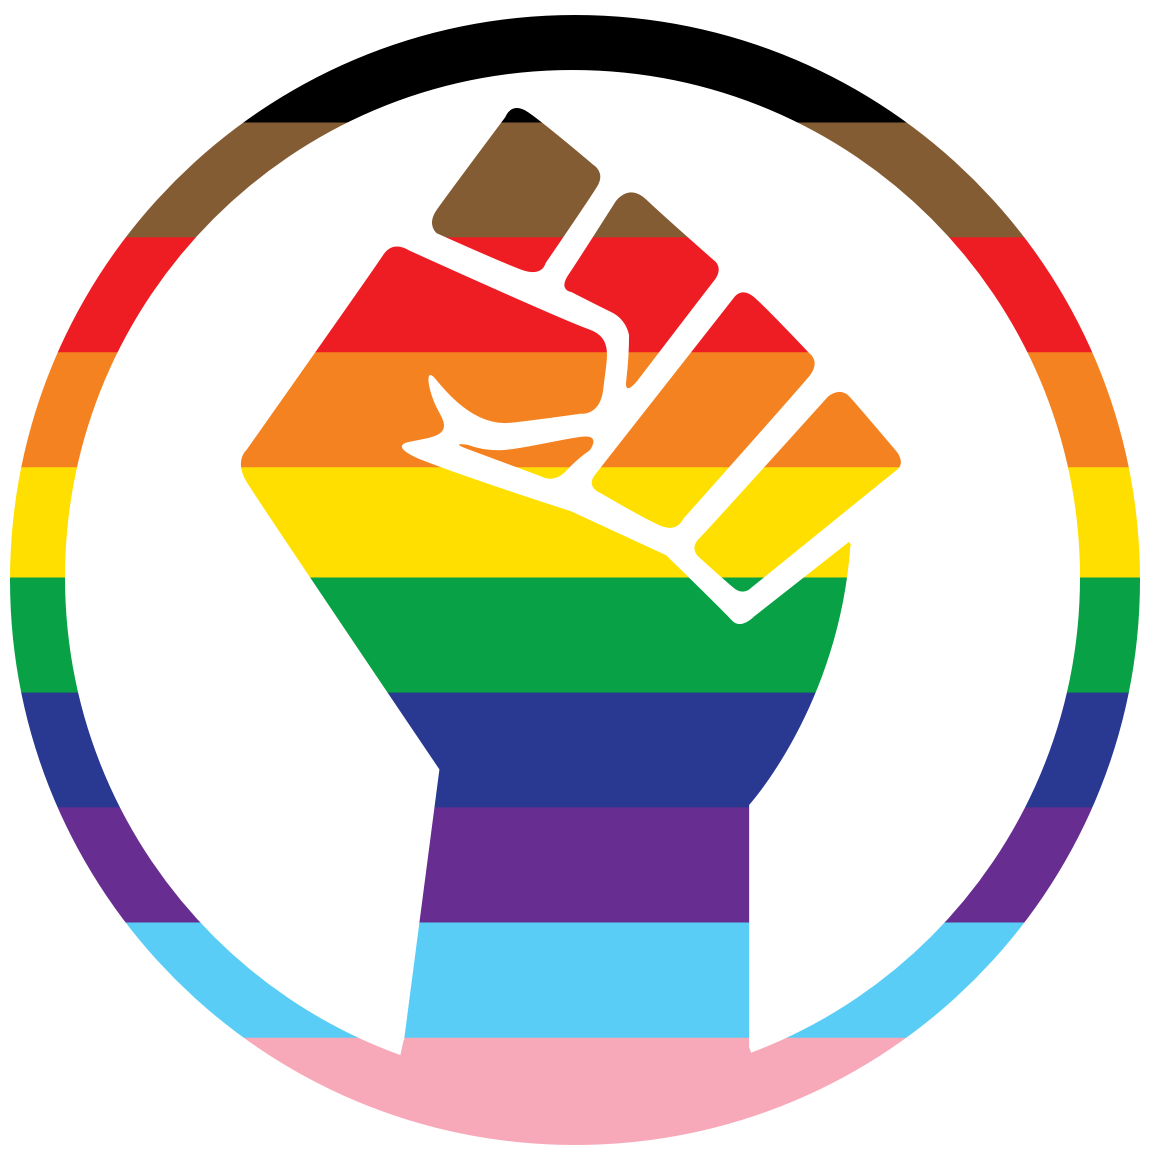 BLM Fist PNG Image File